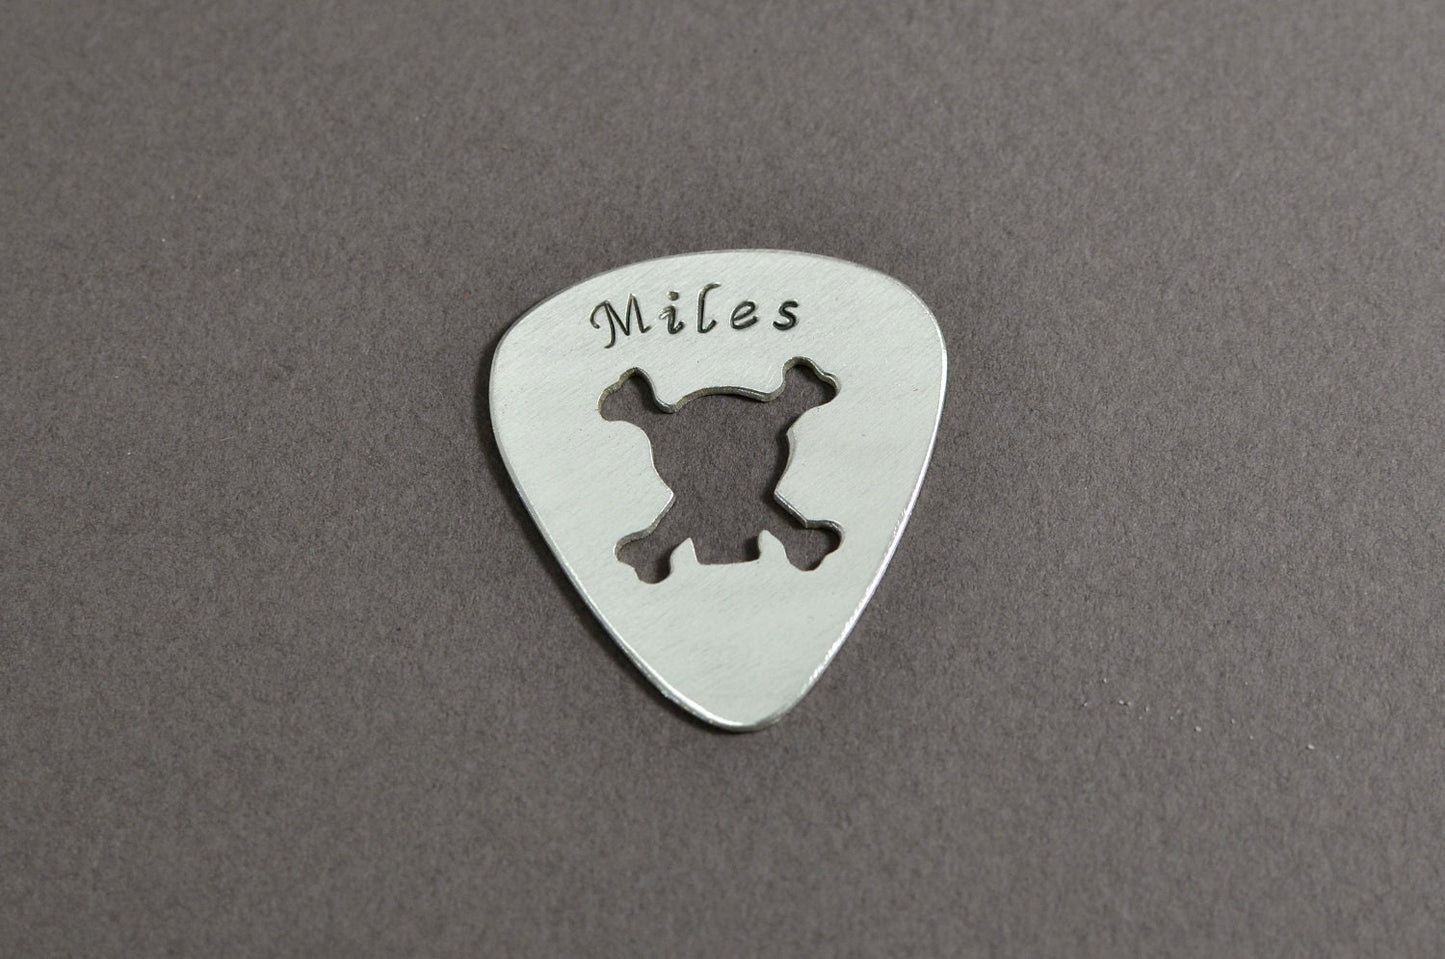 Sterling silver guitar pick with name or custom engraving